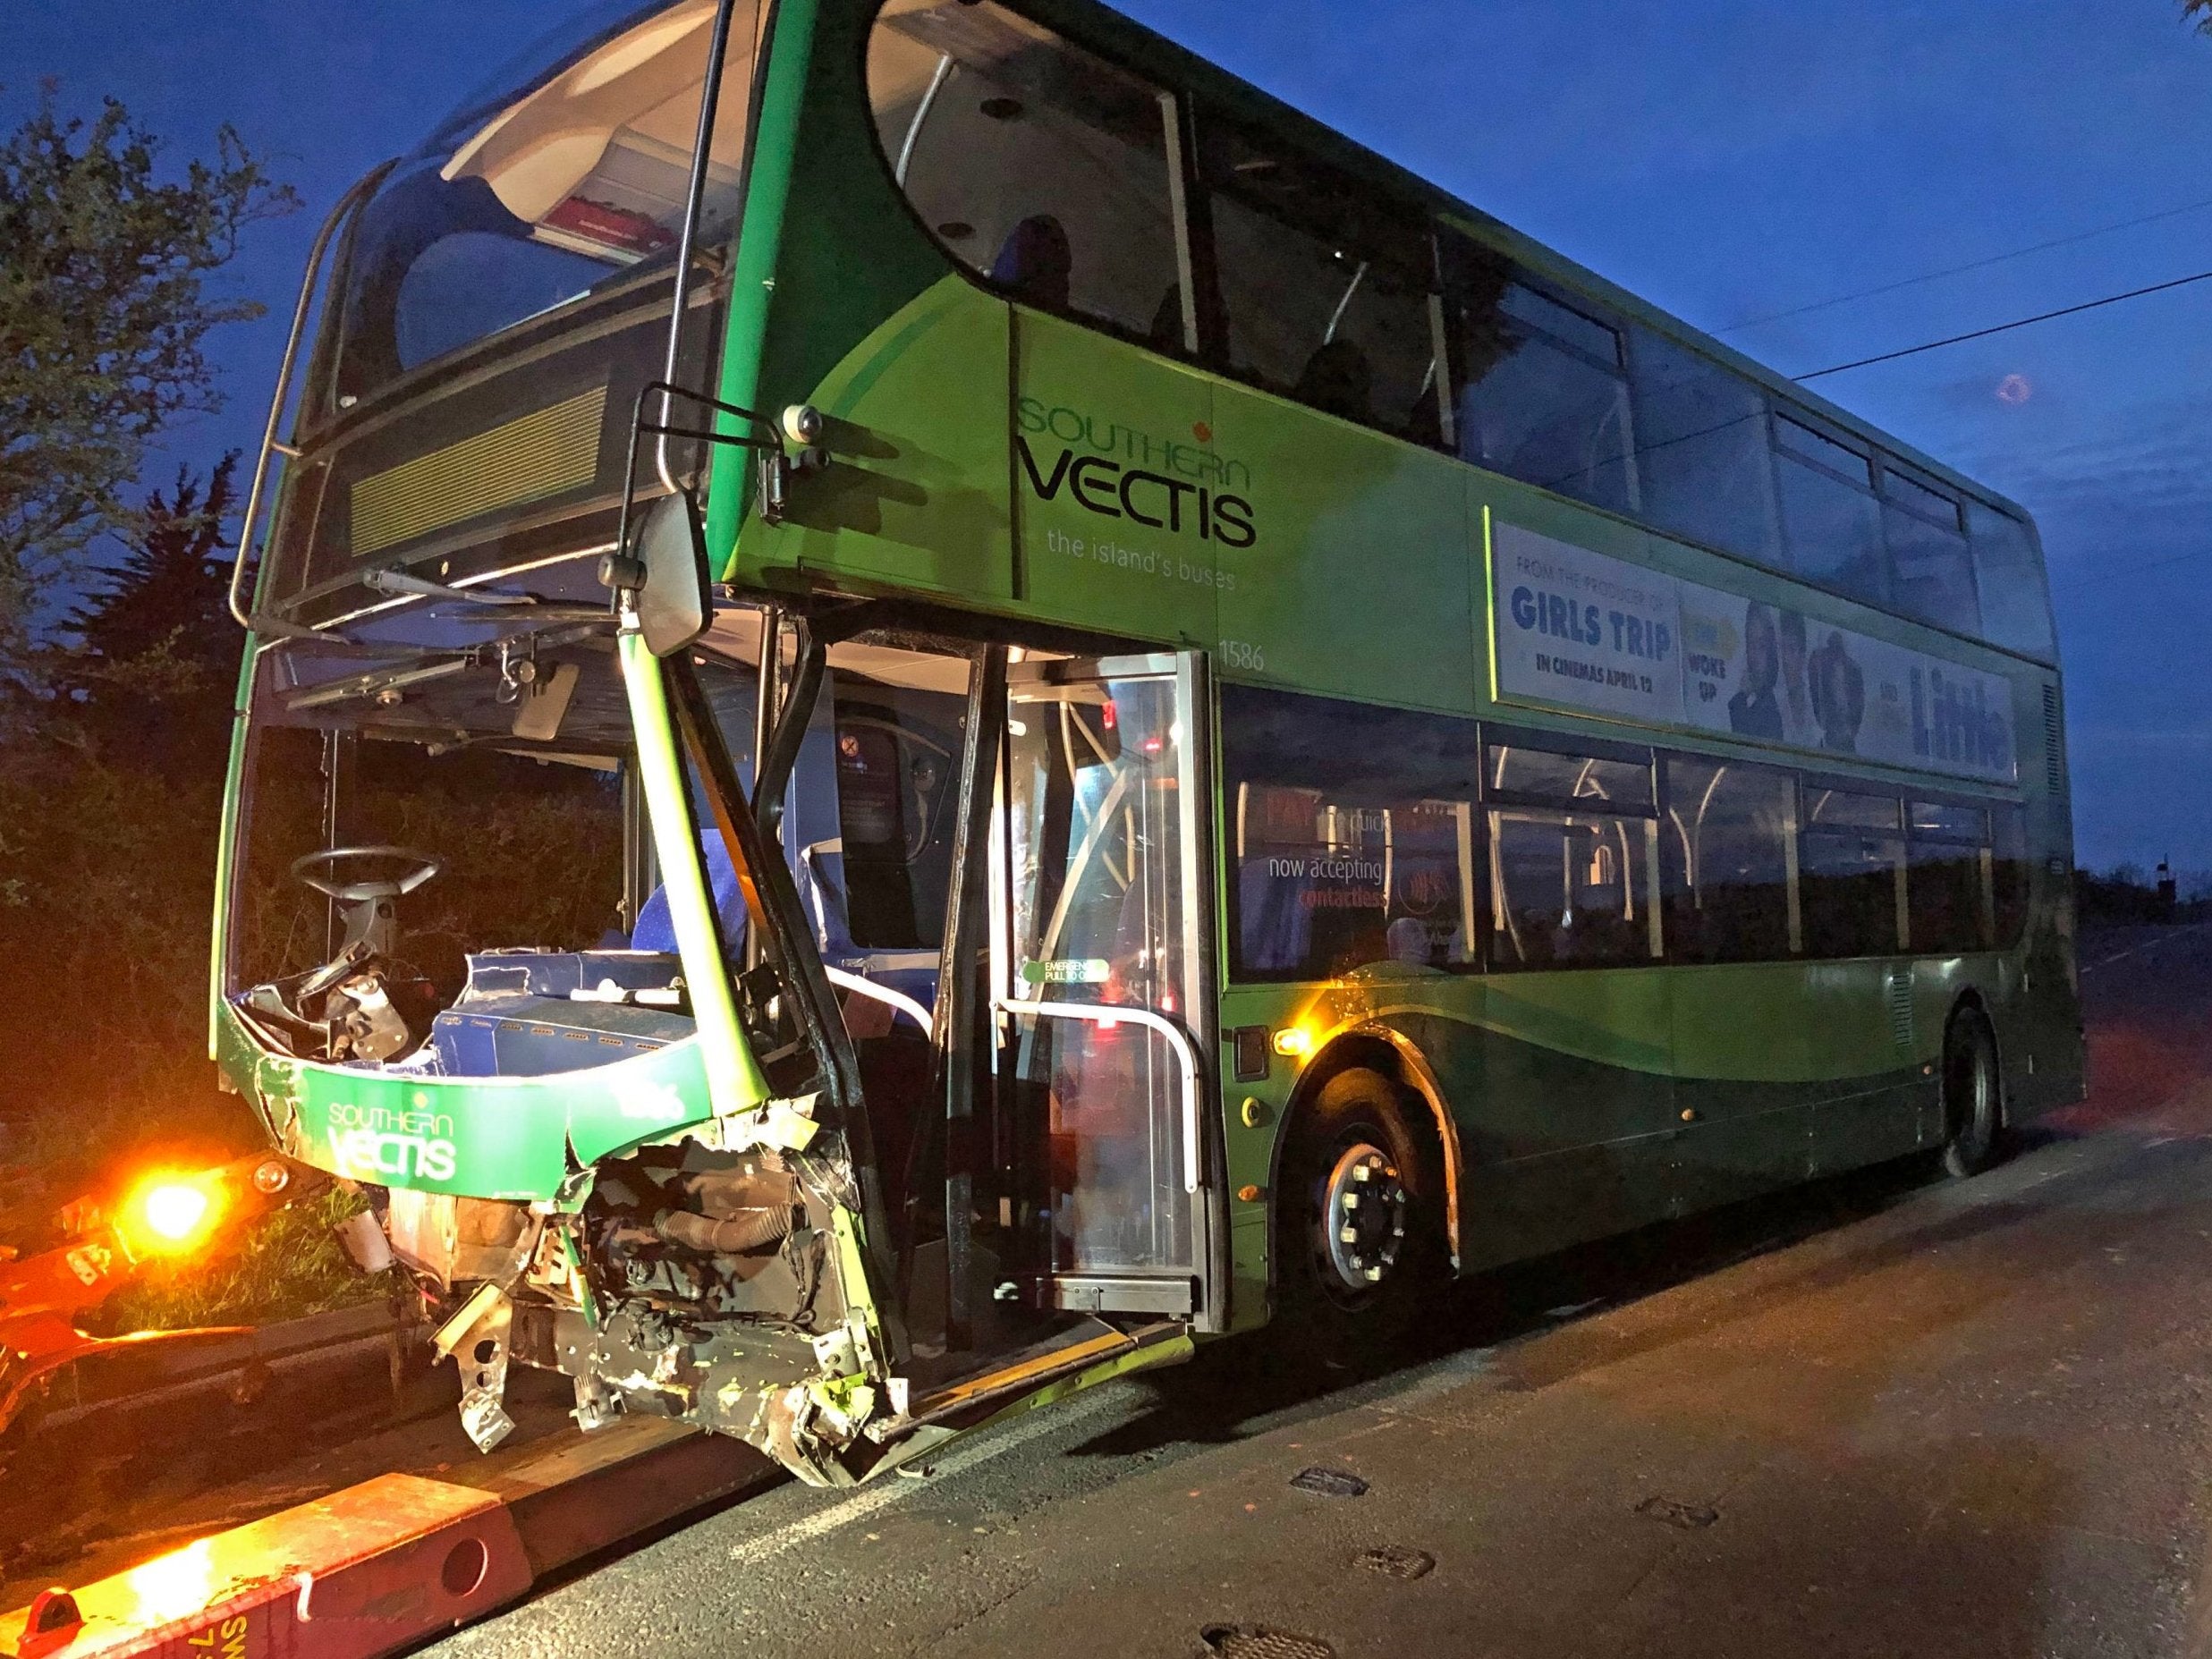 The bus wreckage on Sunday night: the driver had to be cut free